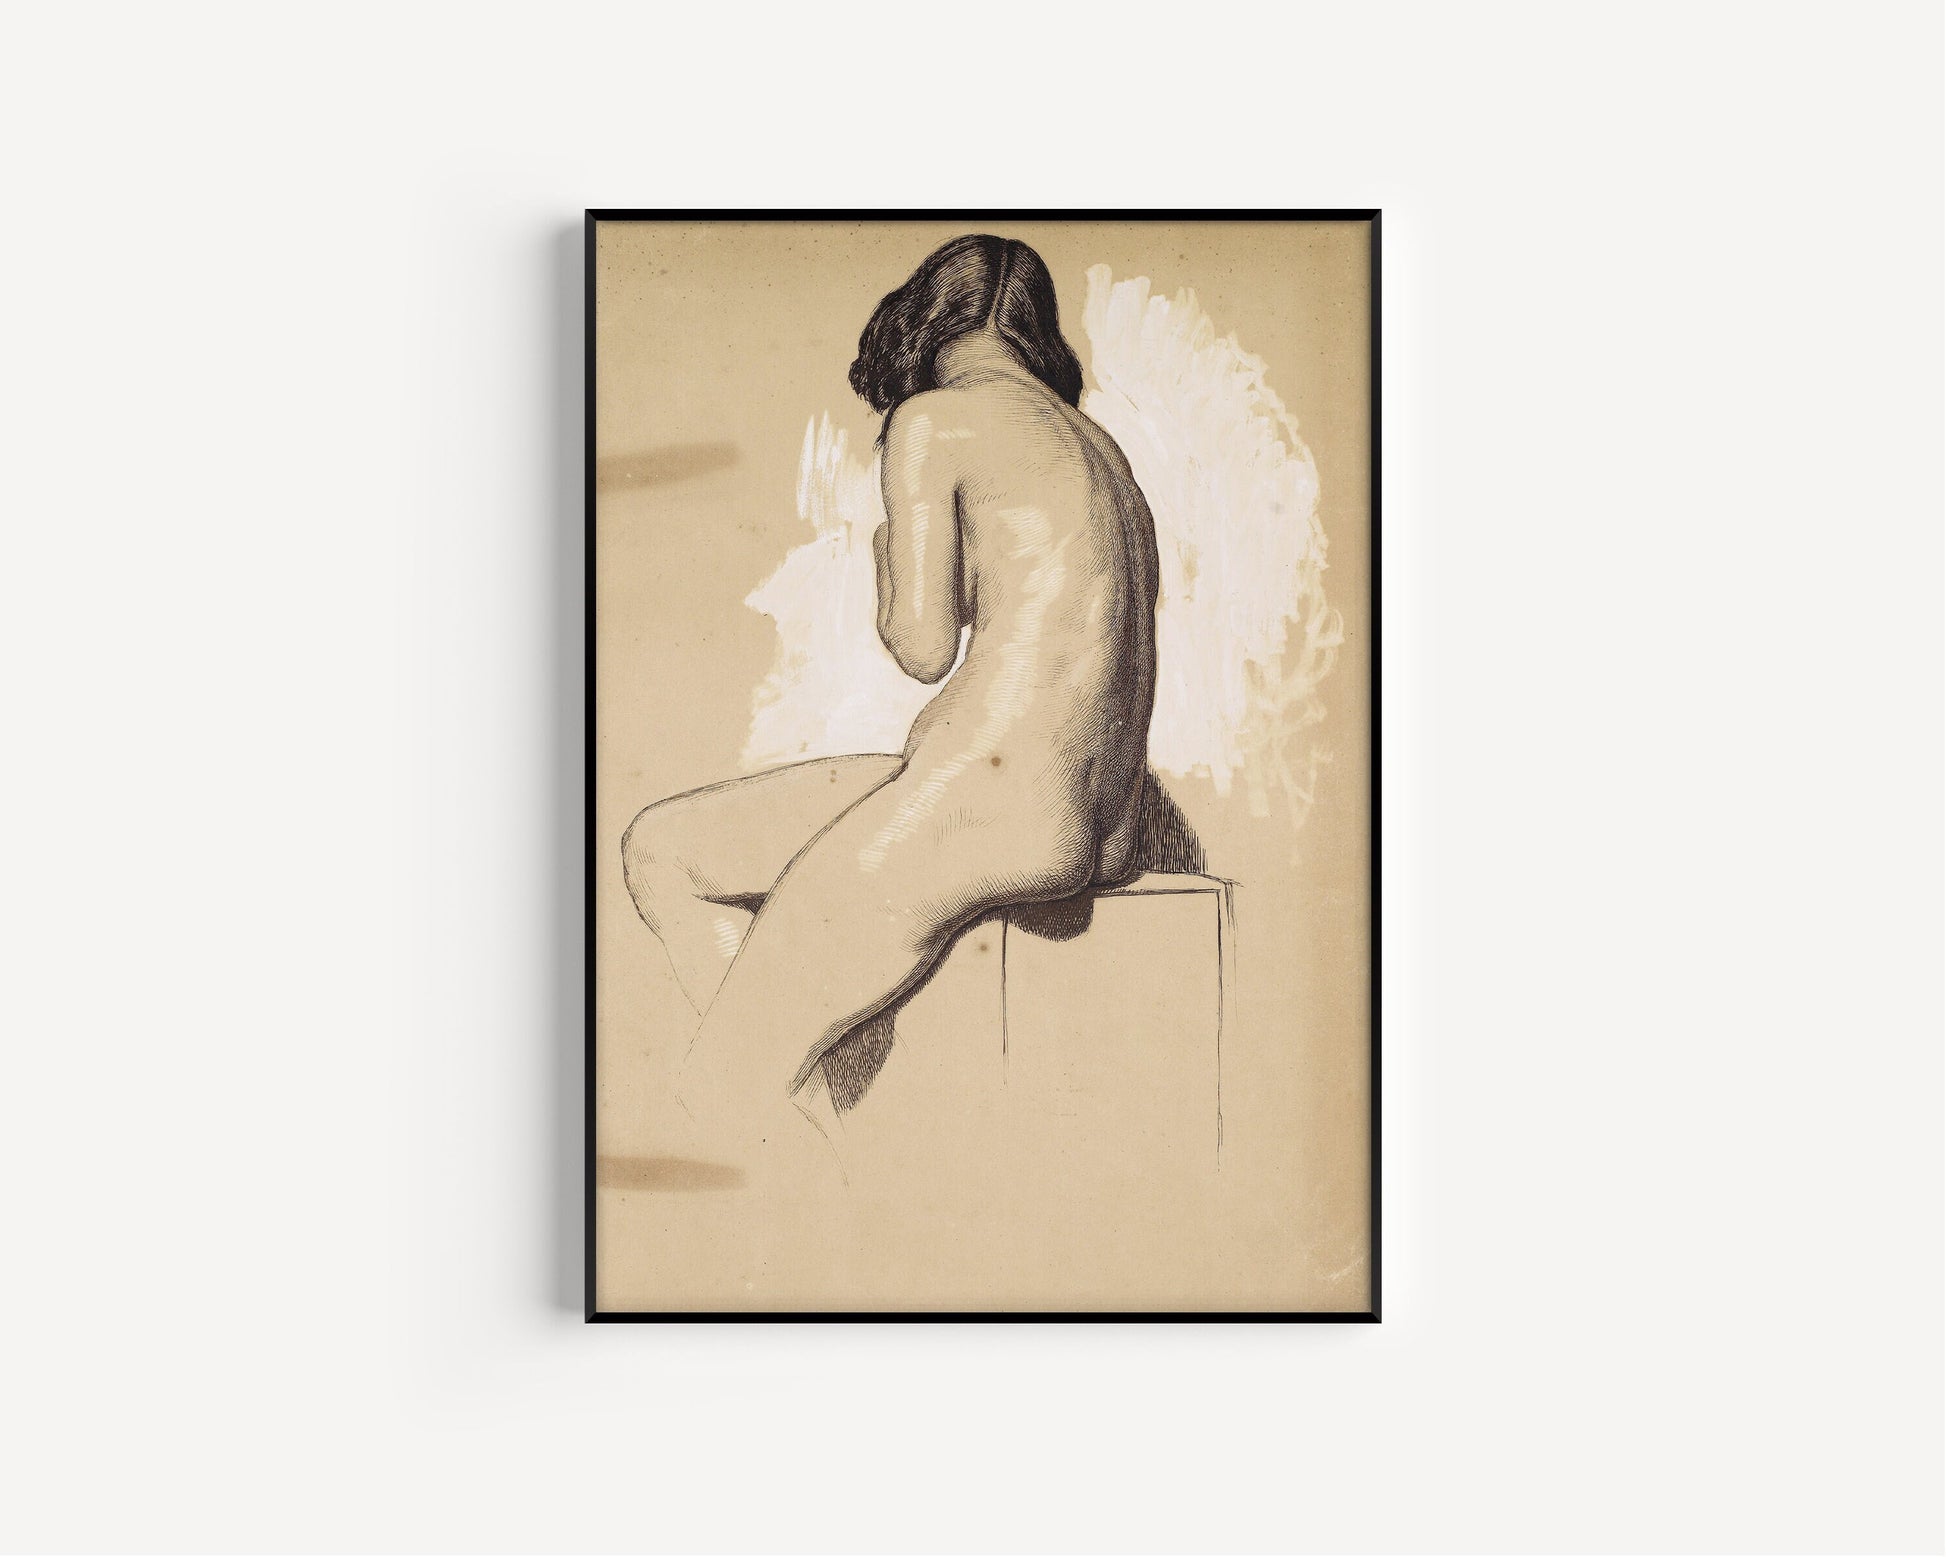 Holman Hunt Nude Sketch Fine Line Beige Art Poster Famous Painting Vintage Ready to hang Framed Home Office Decor Museum Print Gift Idea